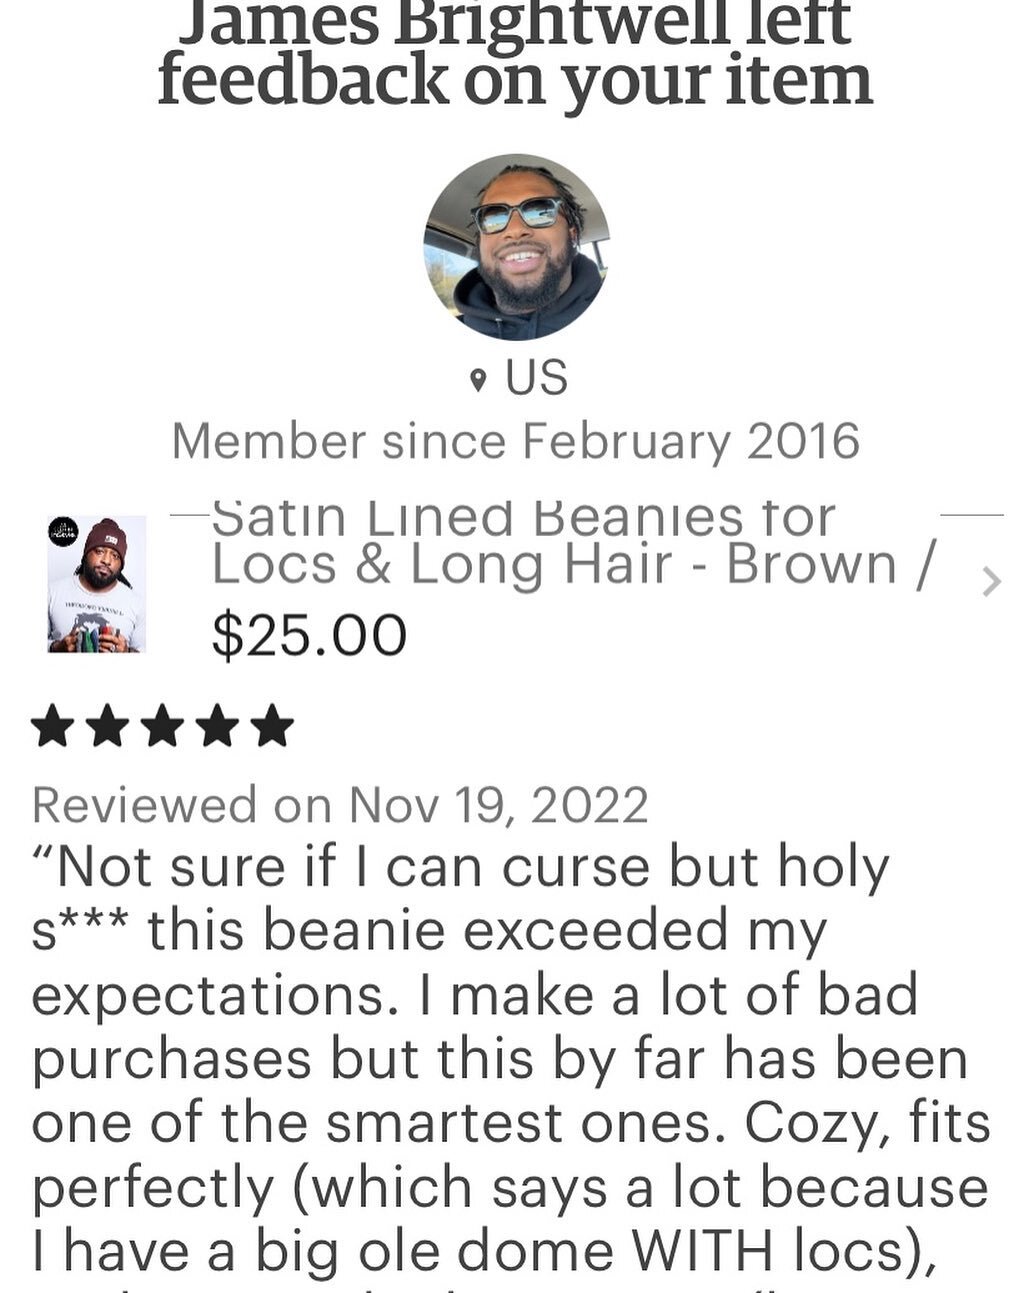 Shout out to James for your 5 Star review at our TheodoreVernell Shop on #etsy 
 

https://www.etsy.com/shop/TheodoreVernellShop

#beaniehat #beaniehatmurah #customersatisfaction #beanie #customerexperience #locs #locmaintenance #longdreads #longlocs